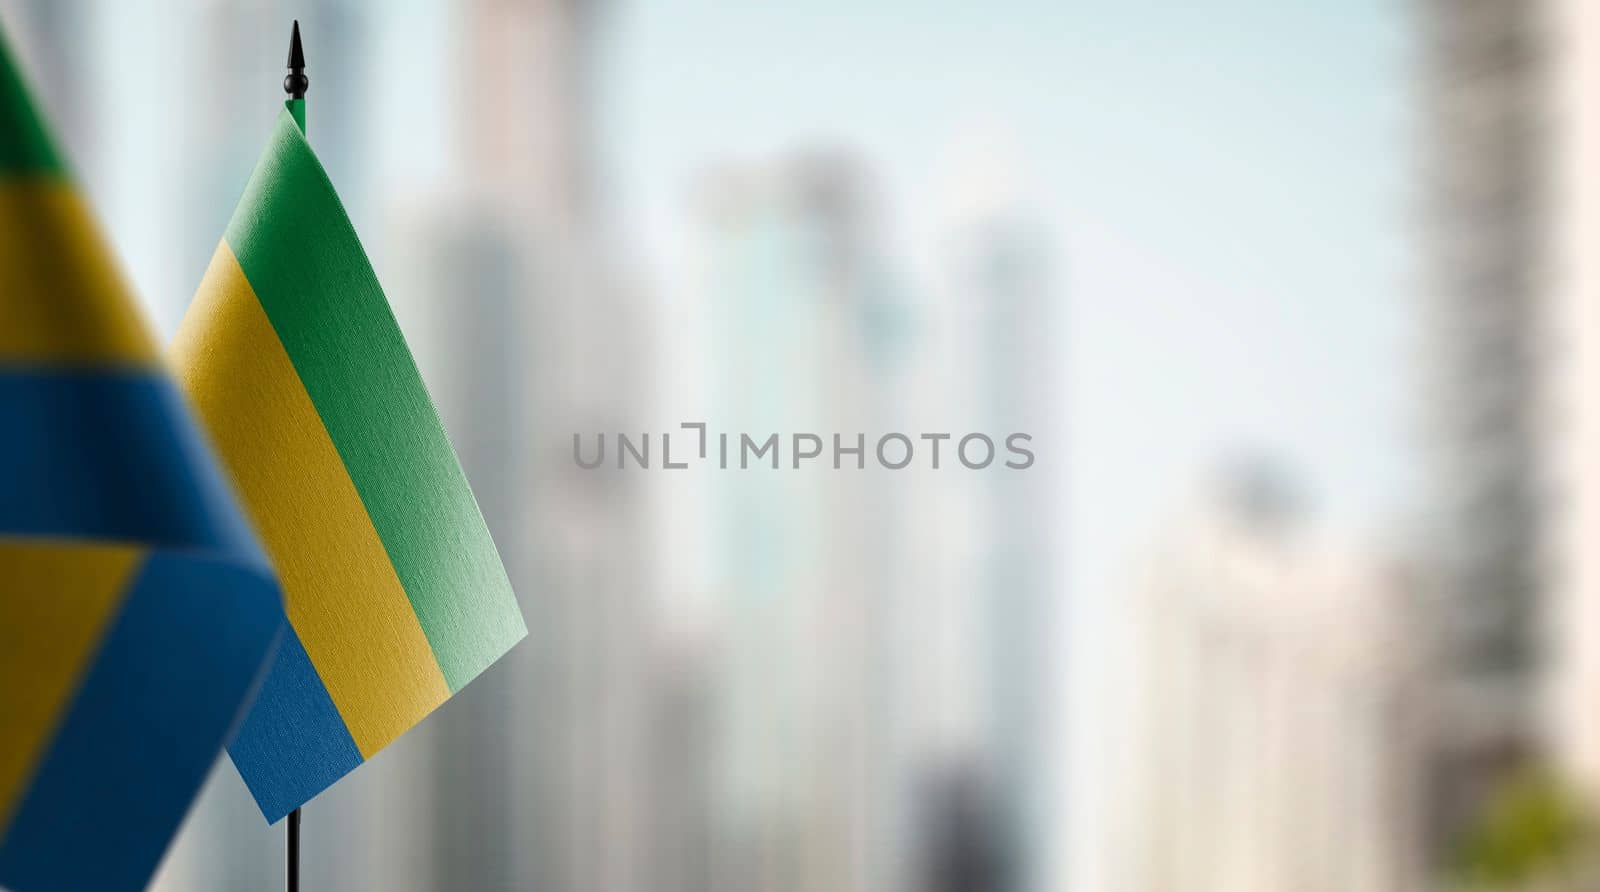 Small flags of the Gabon on an abstract blurry background by butenkow